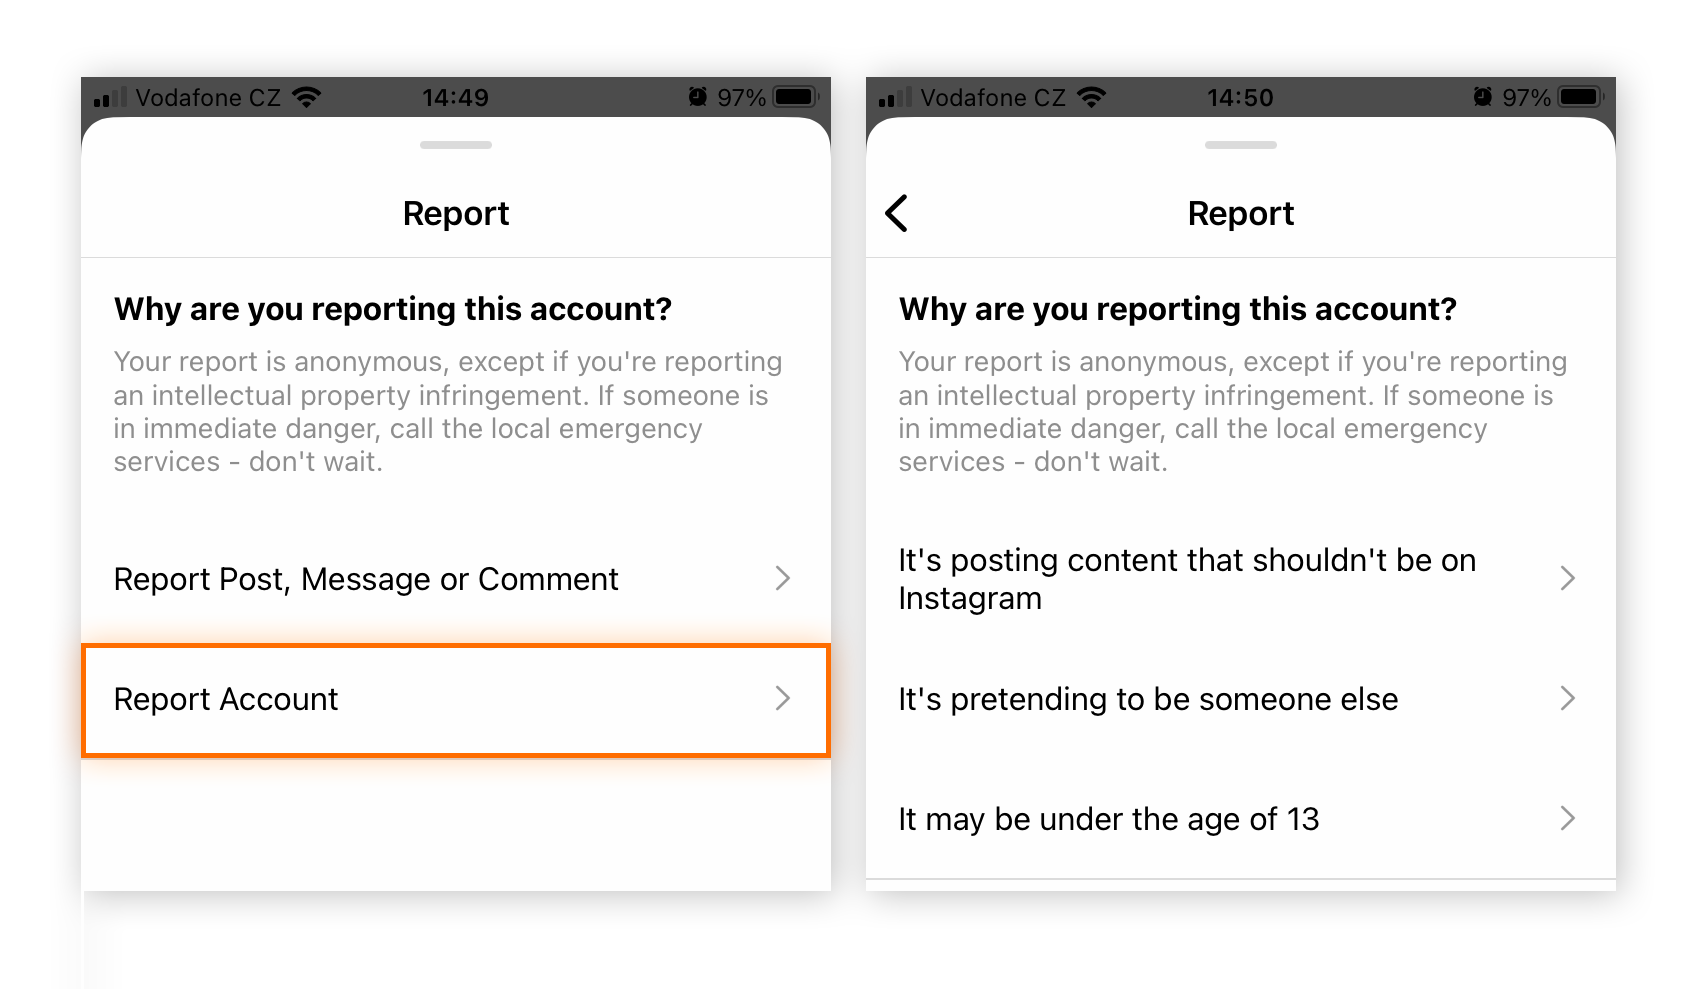 To report most Instagram scammers, choose Report Account > It's pretending to be someone else.